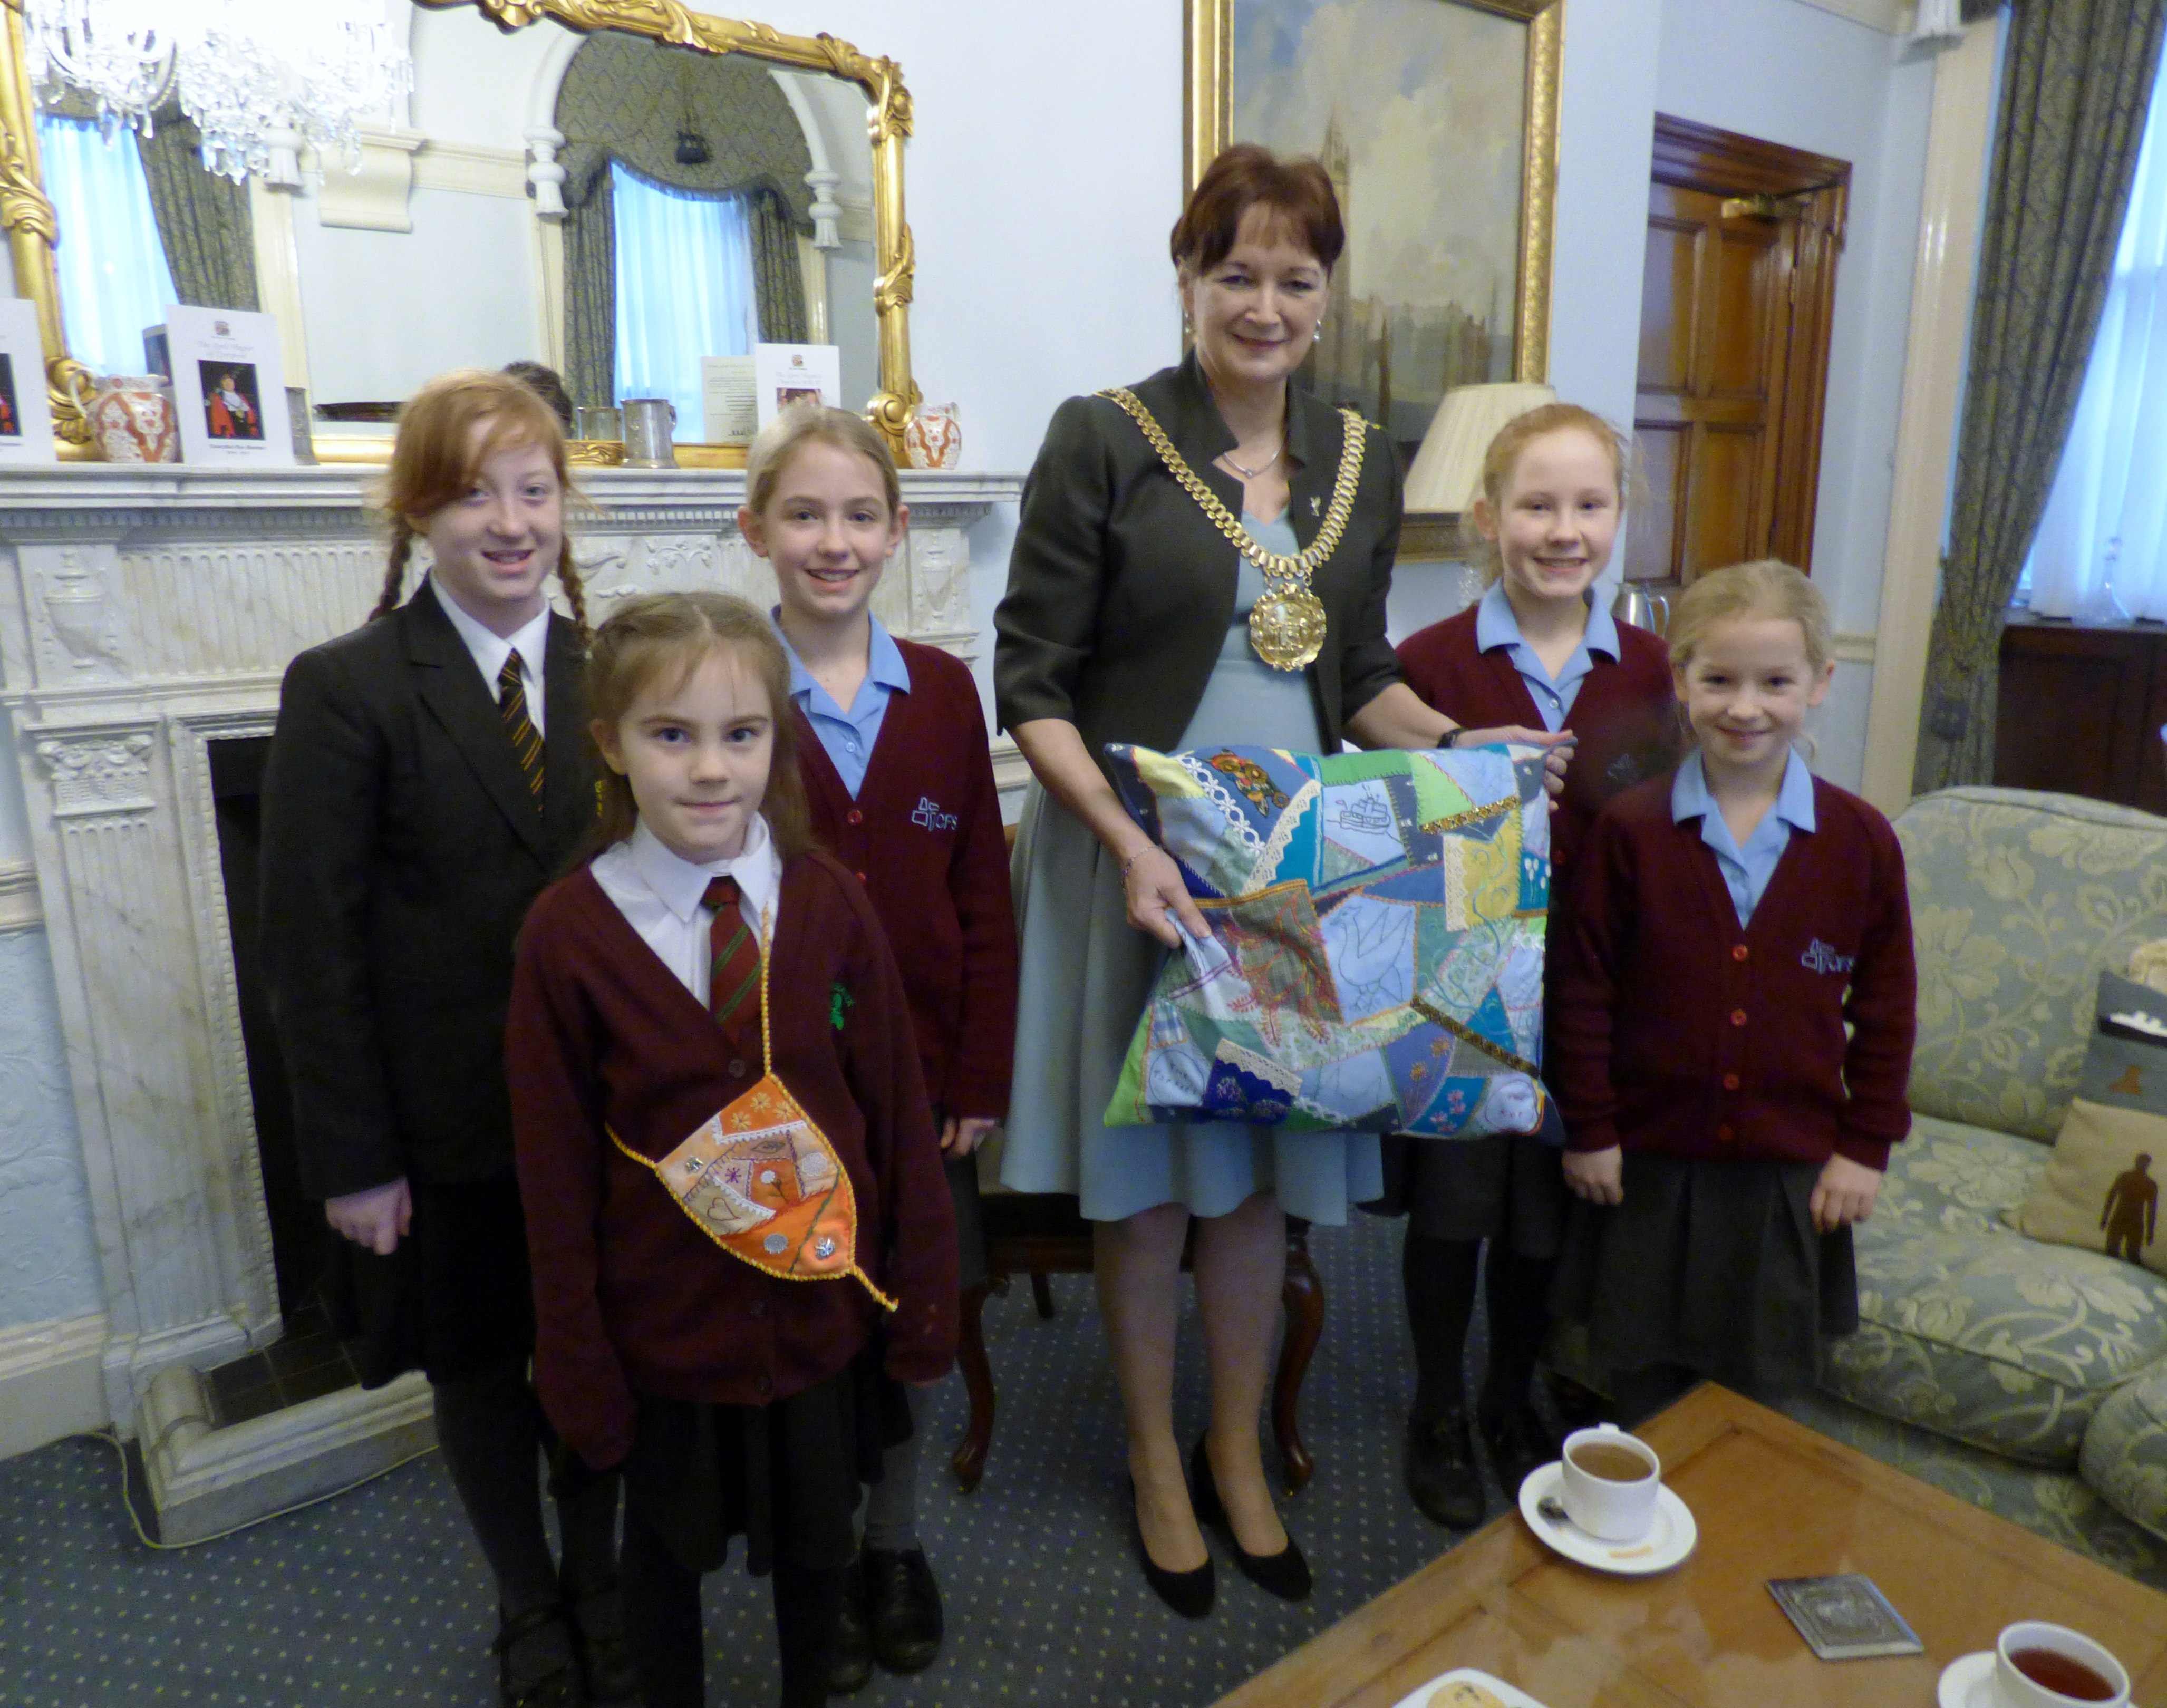 Merseyside YE at Liverpool Town Hall, Jan 2017. We presented a cushion to Liverpool Lord Mayor Cllr. Roz Gladden